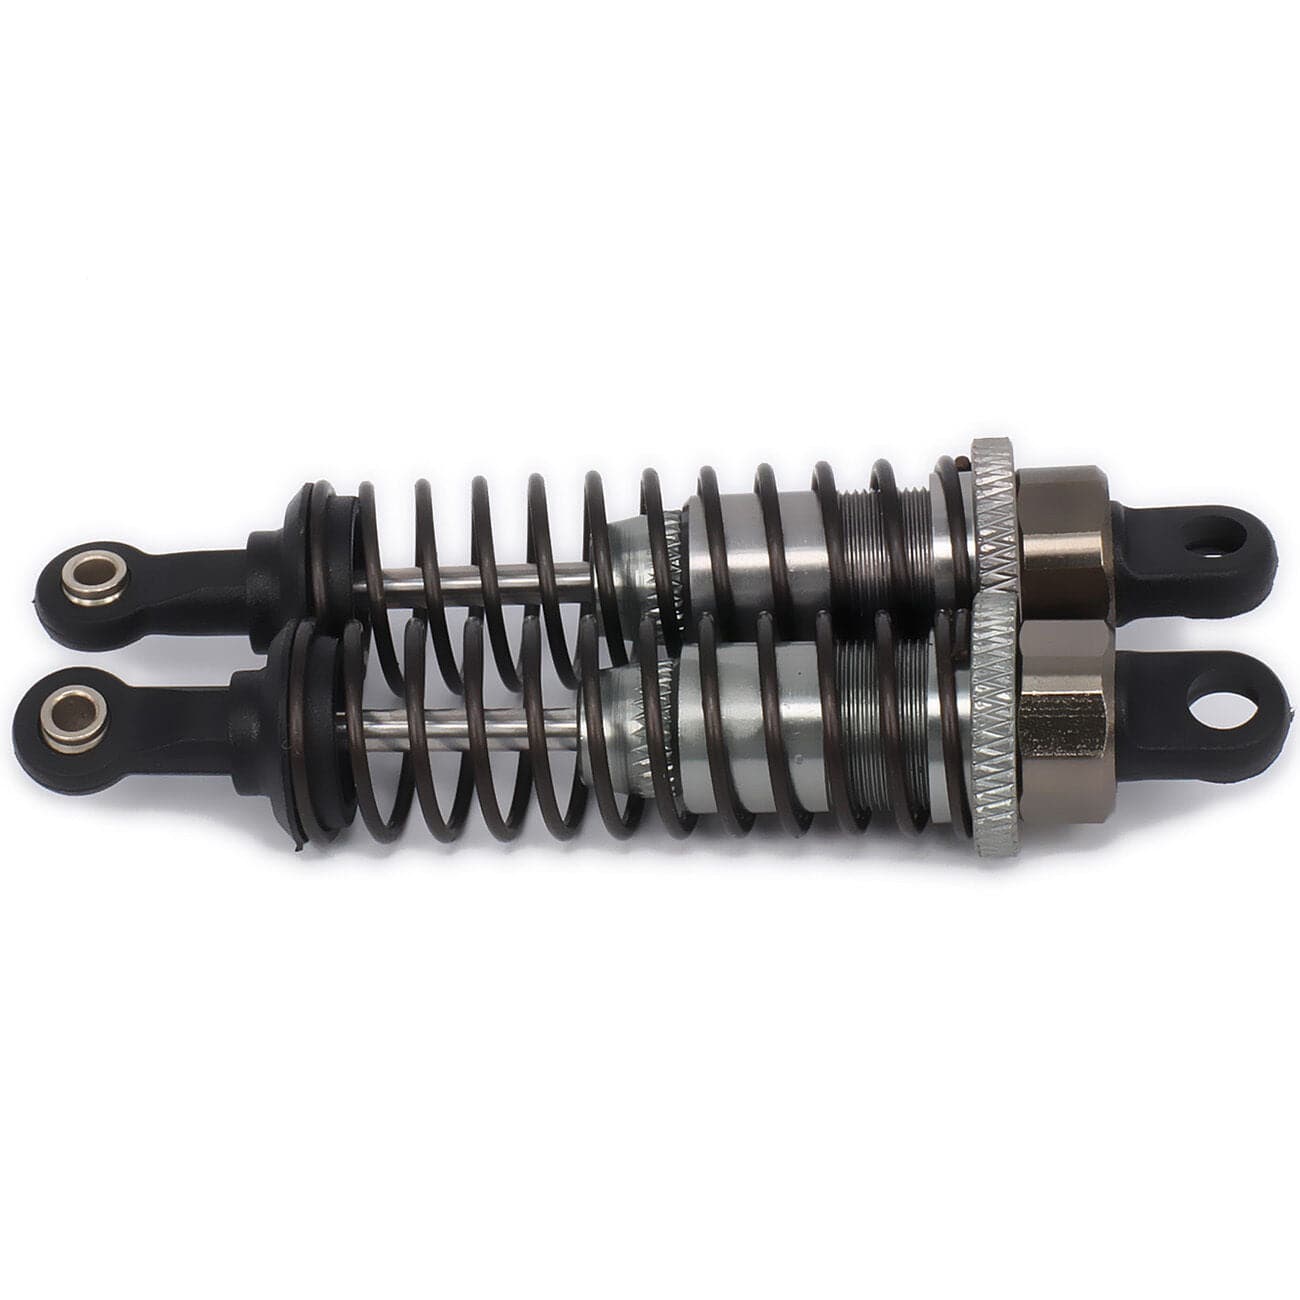 RCAWD RC CAR UPGRADE PARTS Titanium RCAWD 70mm Shock Absorber Damper Oil Adjustable 2PCS For Rc Car 1/16 Model Car